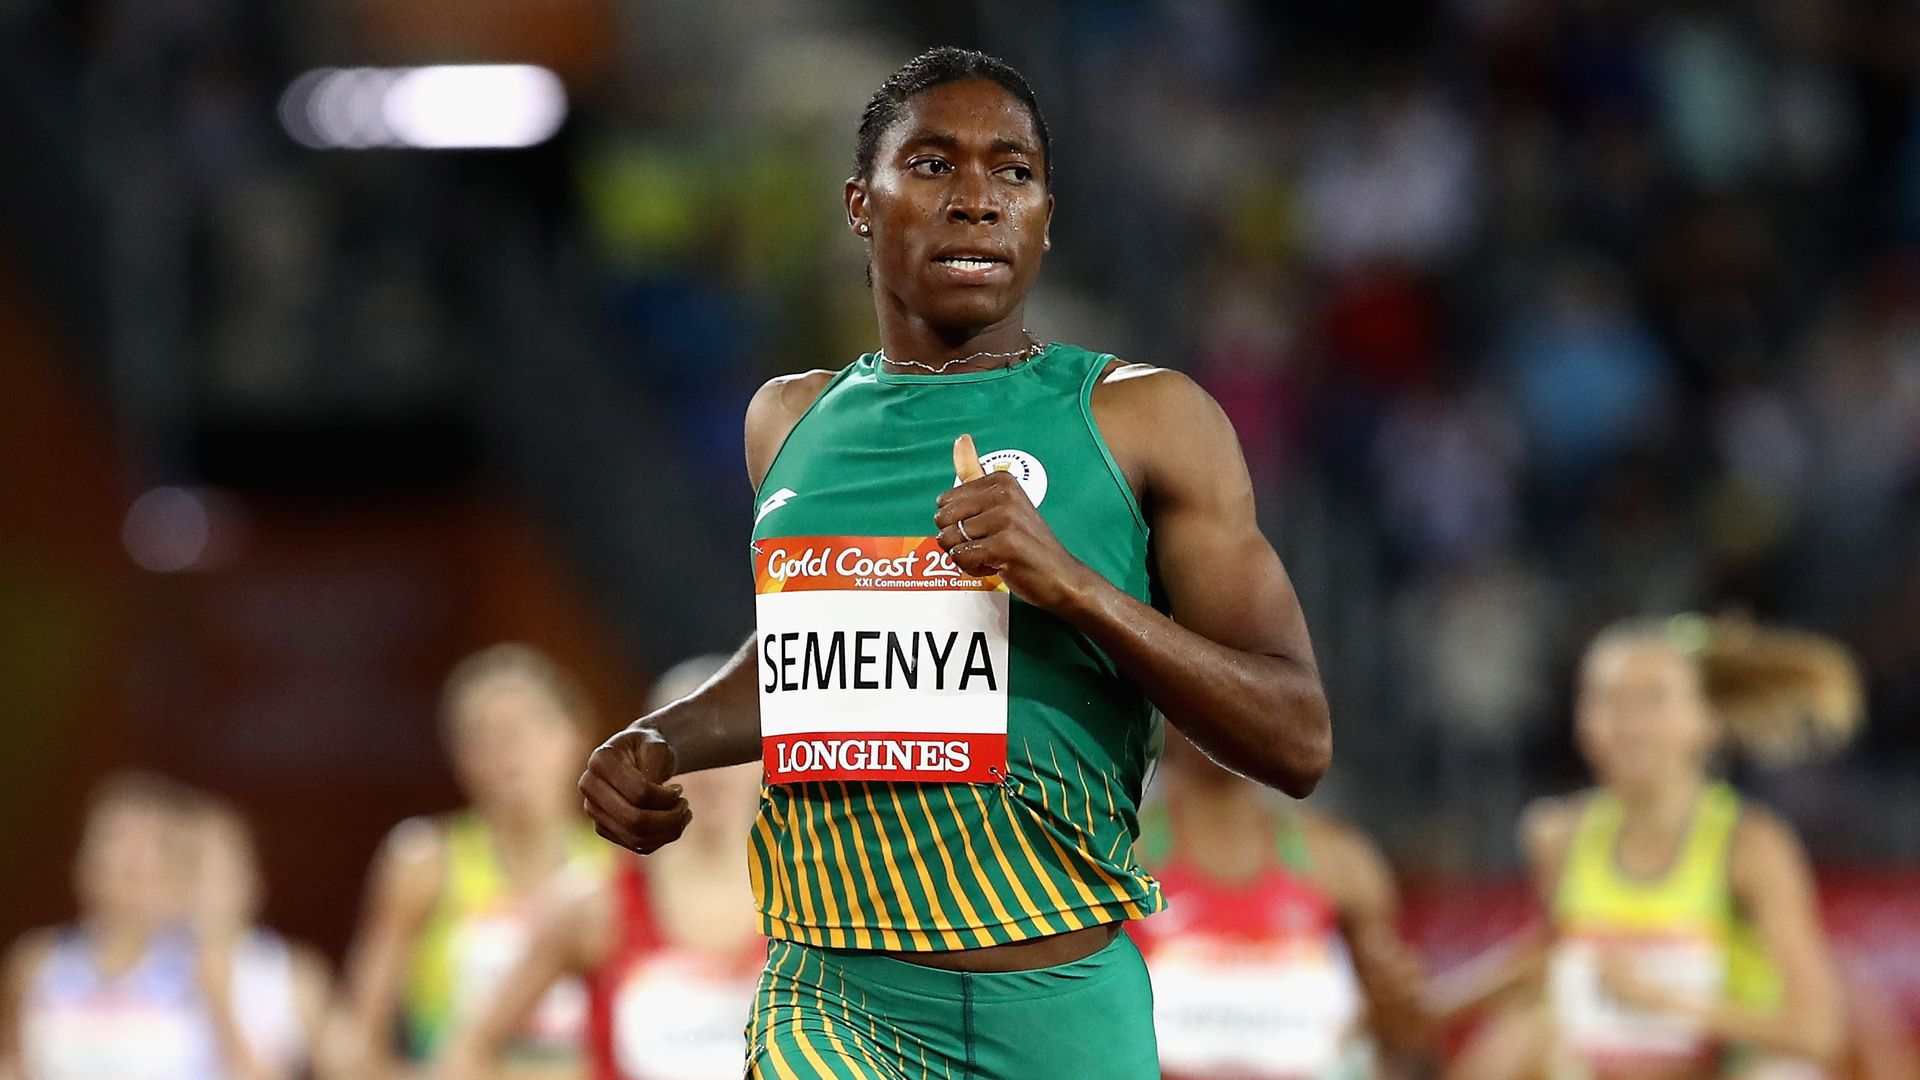 Caster Semenya of South Africa wins gold in the Women's 1500 metres final at the Gold Coast 2018 Commonwealth Games at Carrara Stadium on April 10, 2018.